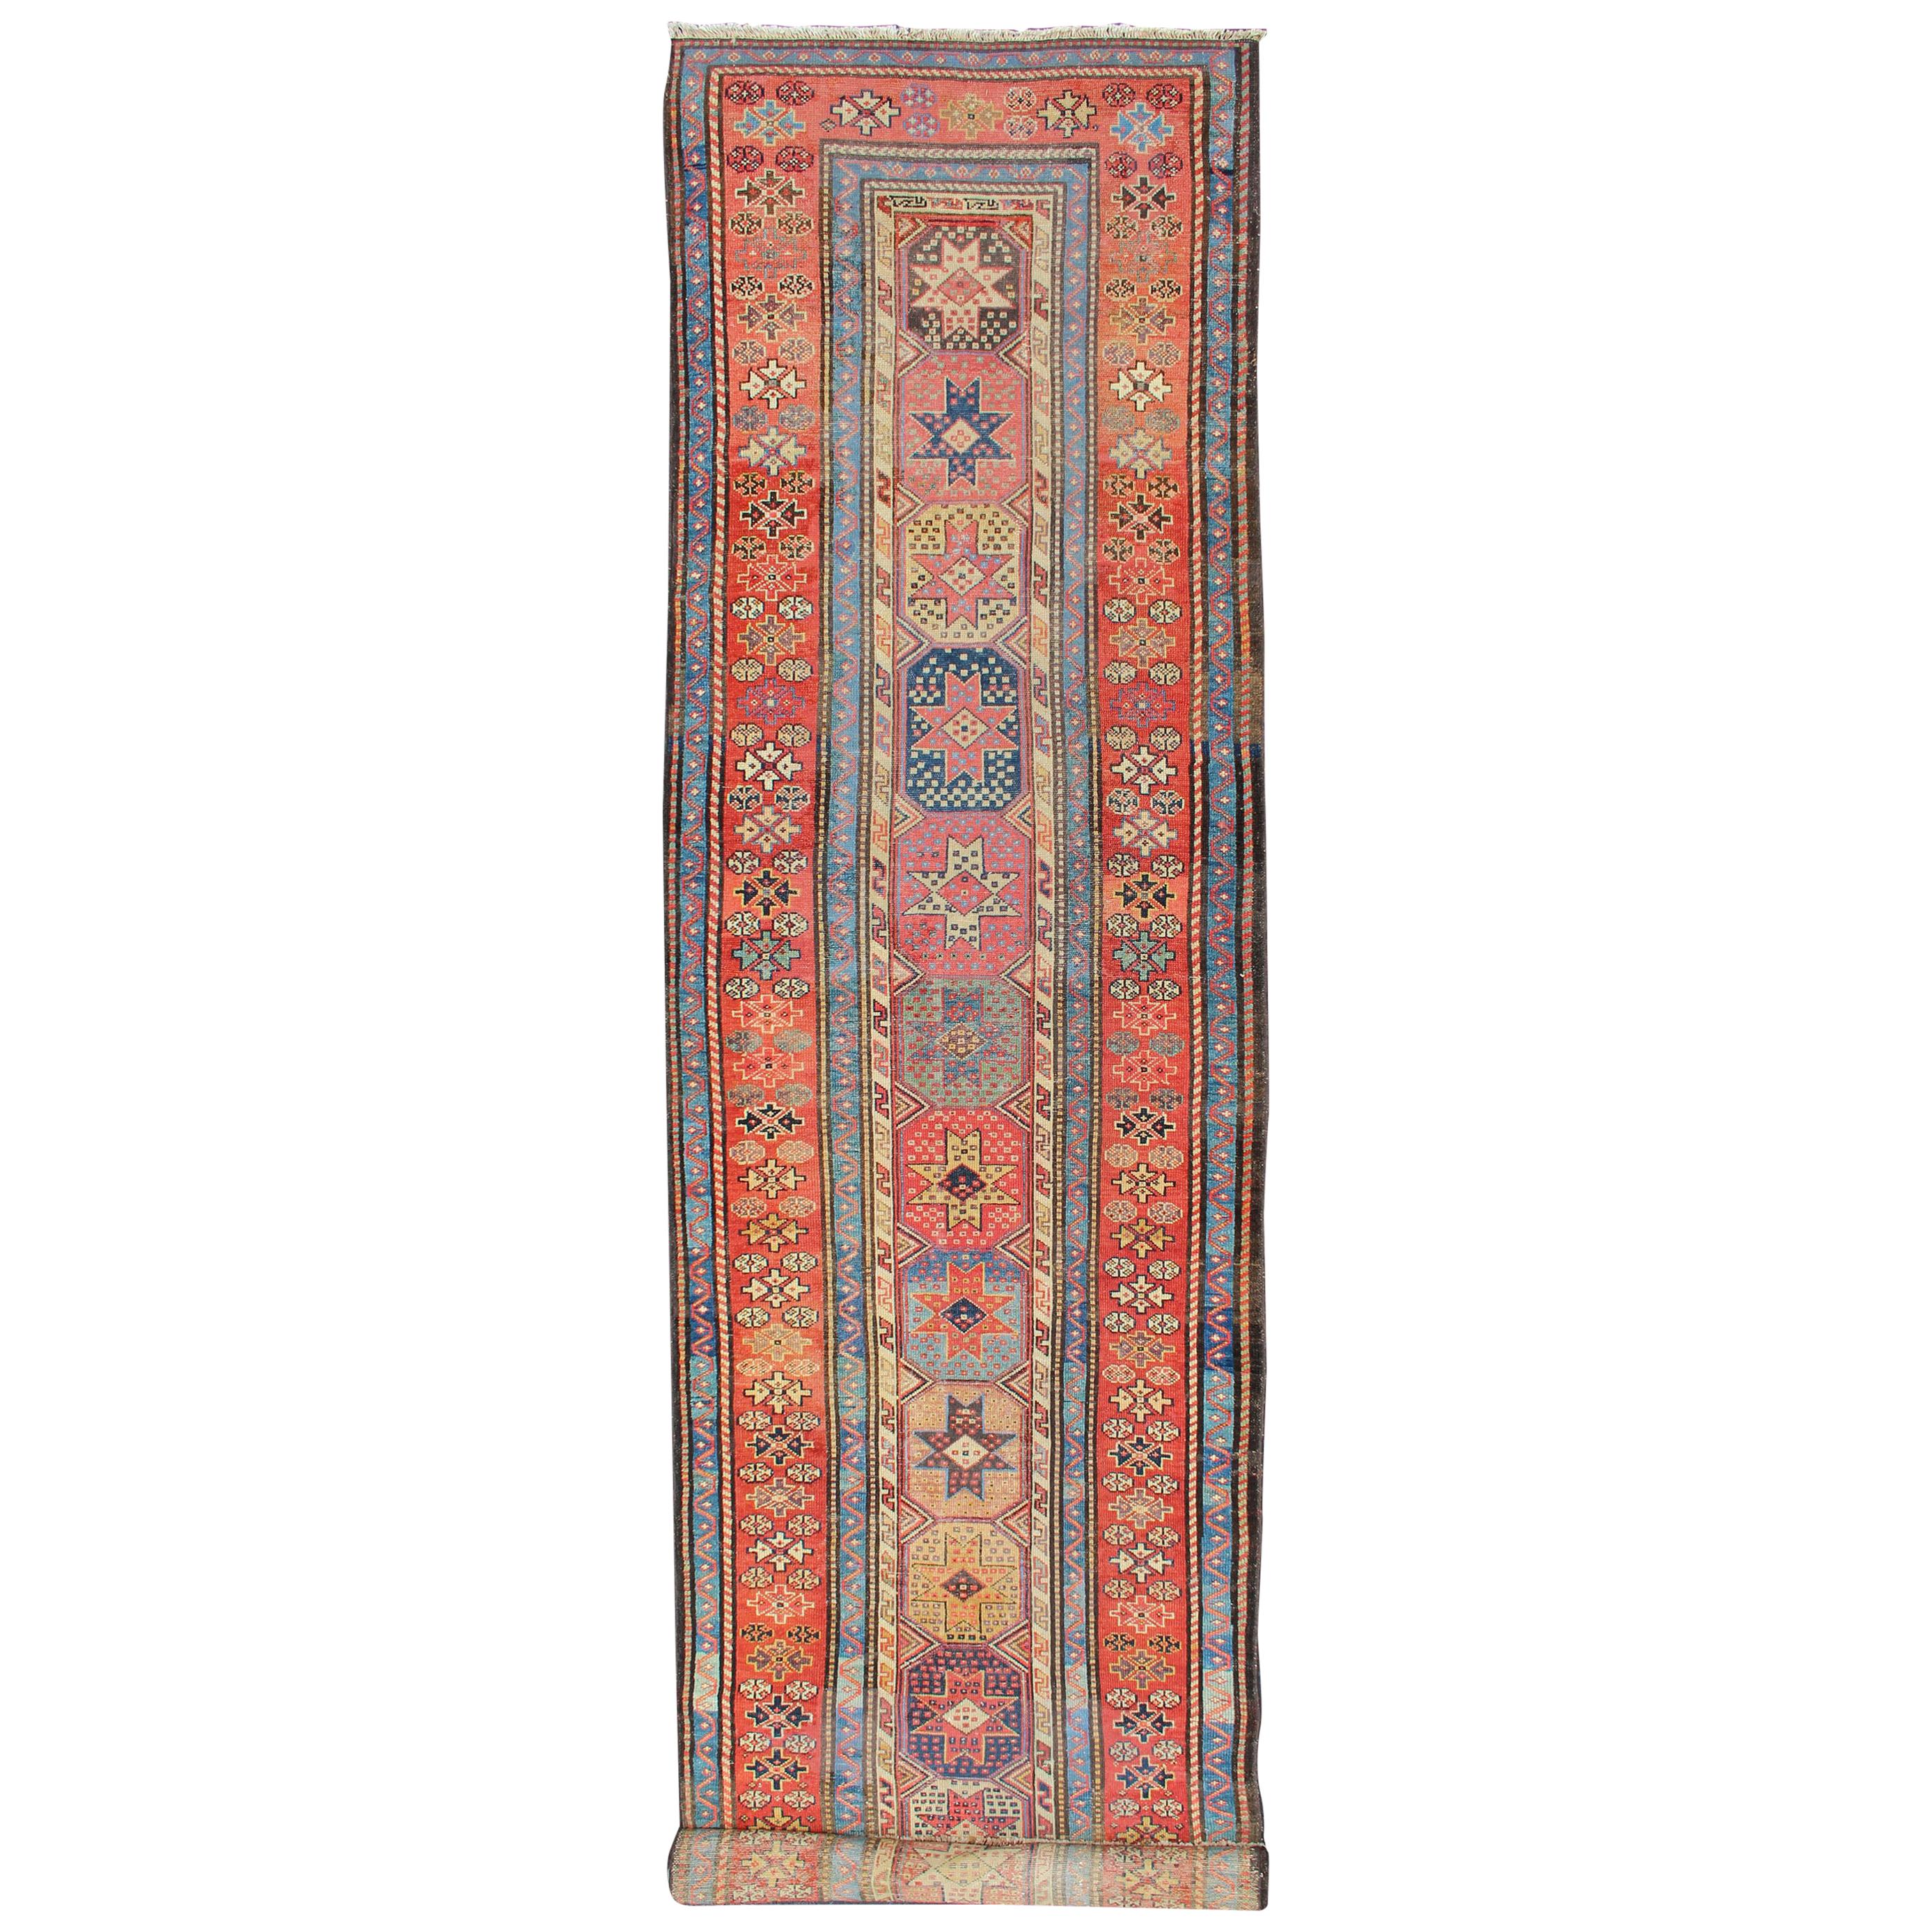 Antique Persian Kazak Runner with Medallions in Red, Blue, and Yellow